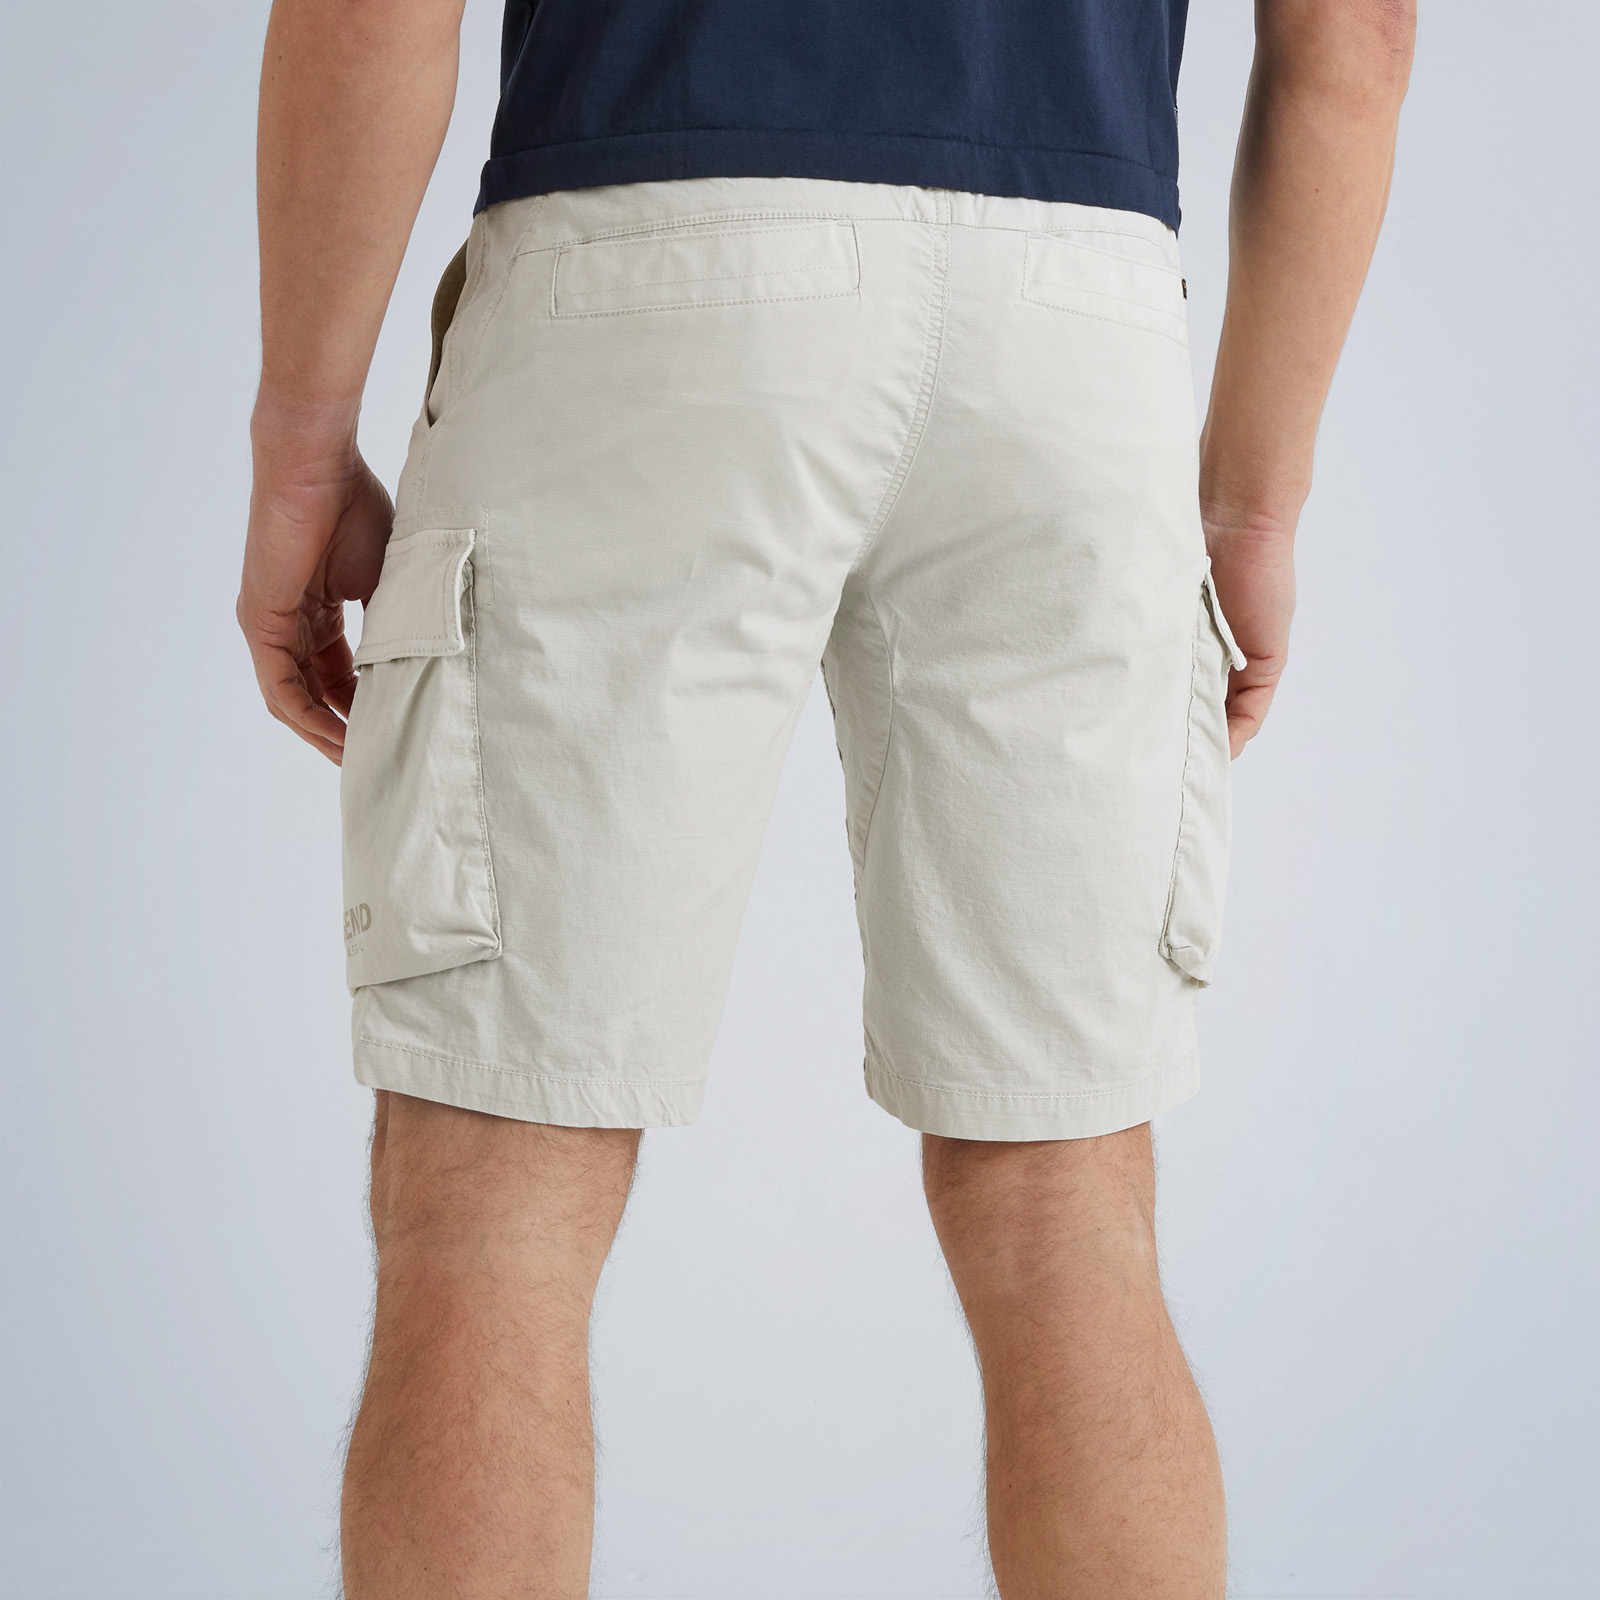 PME LEGEND | Wingtip Cargo Short | Free shipping and returns